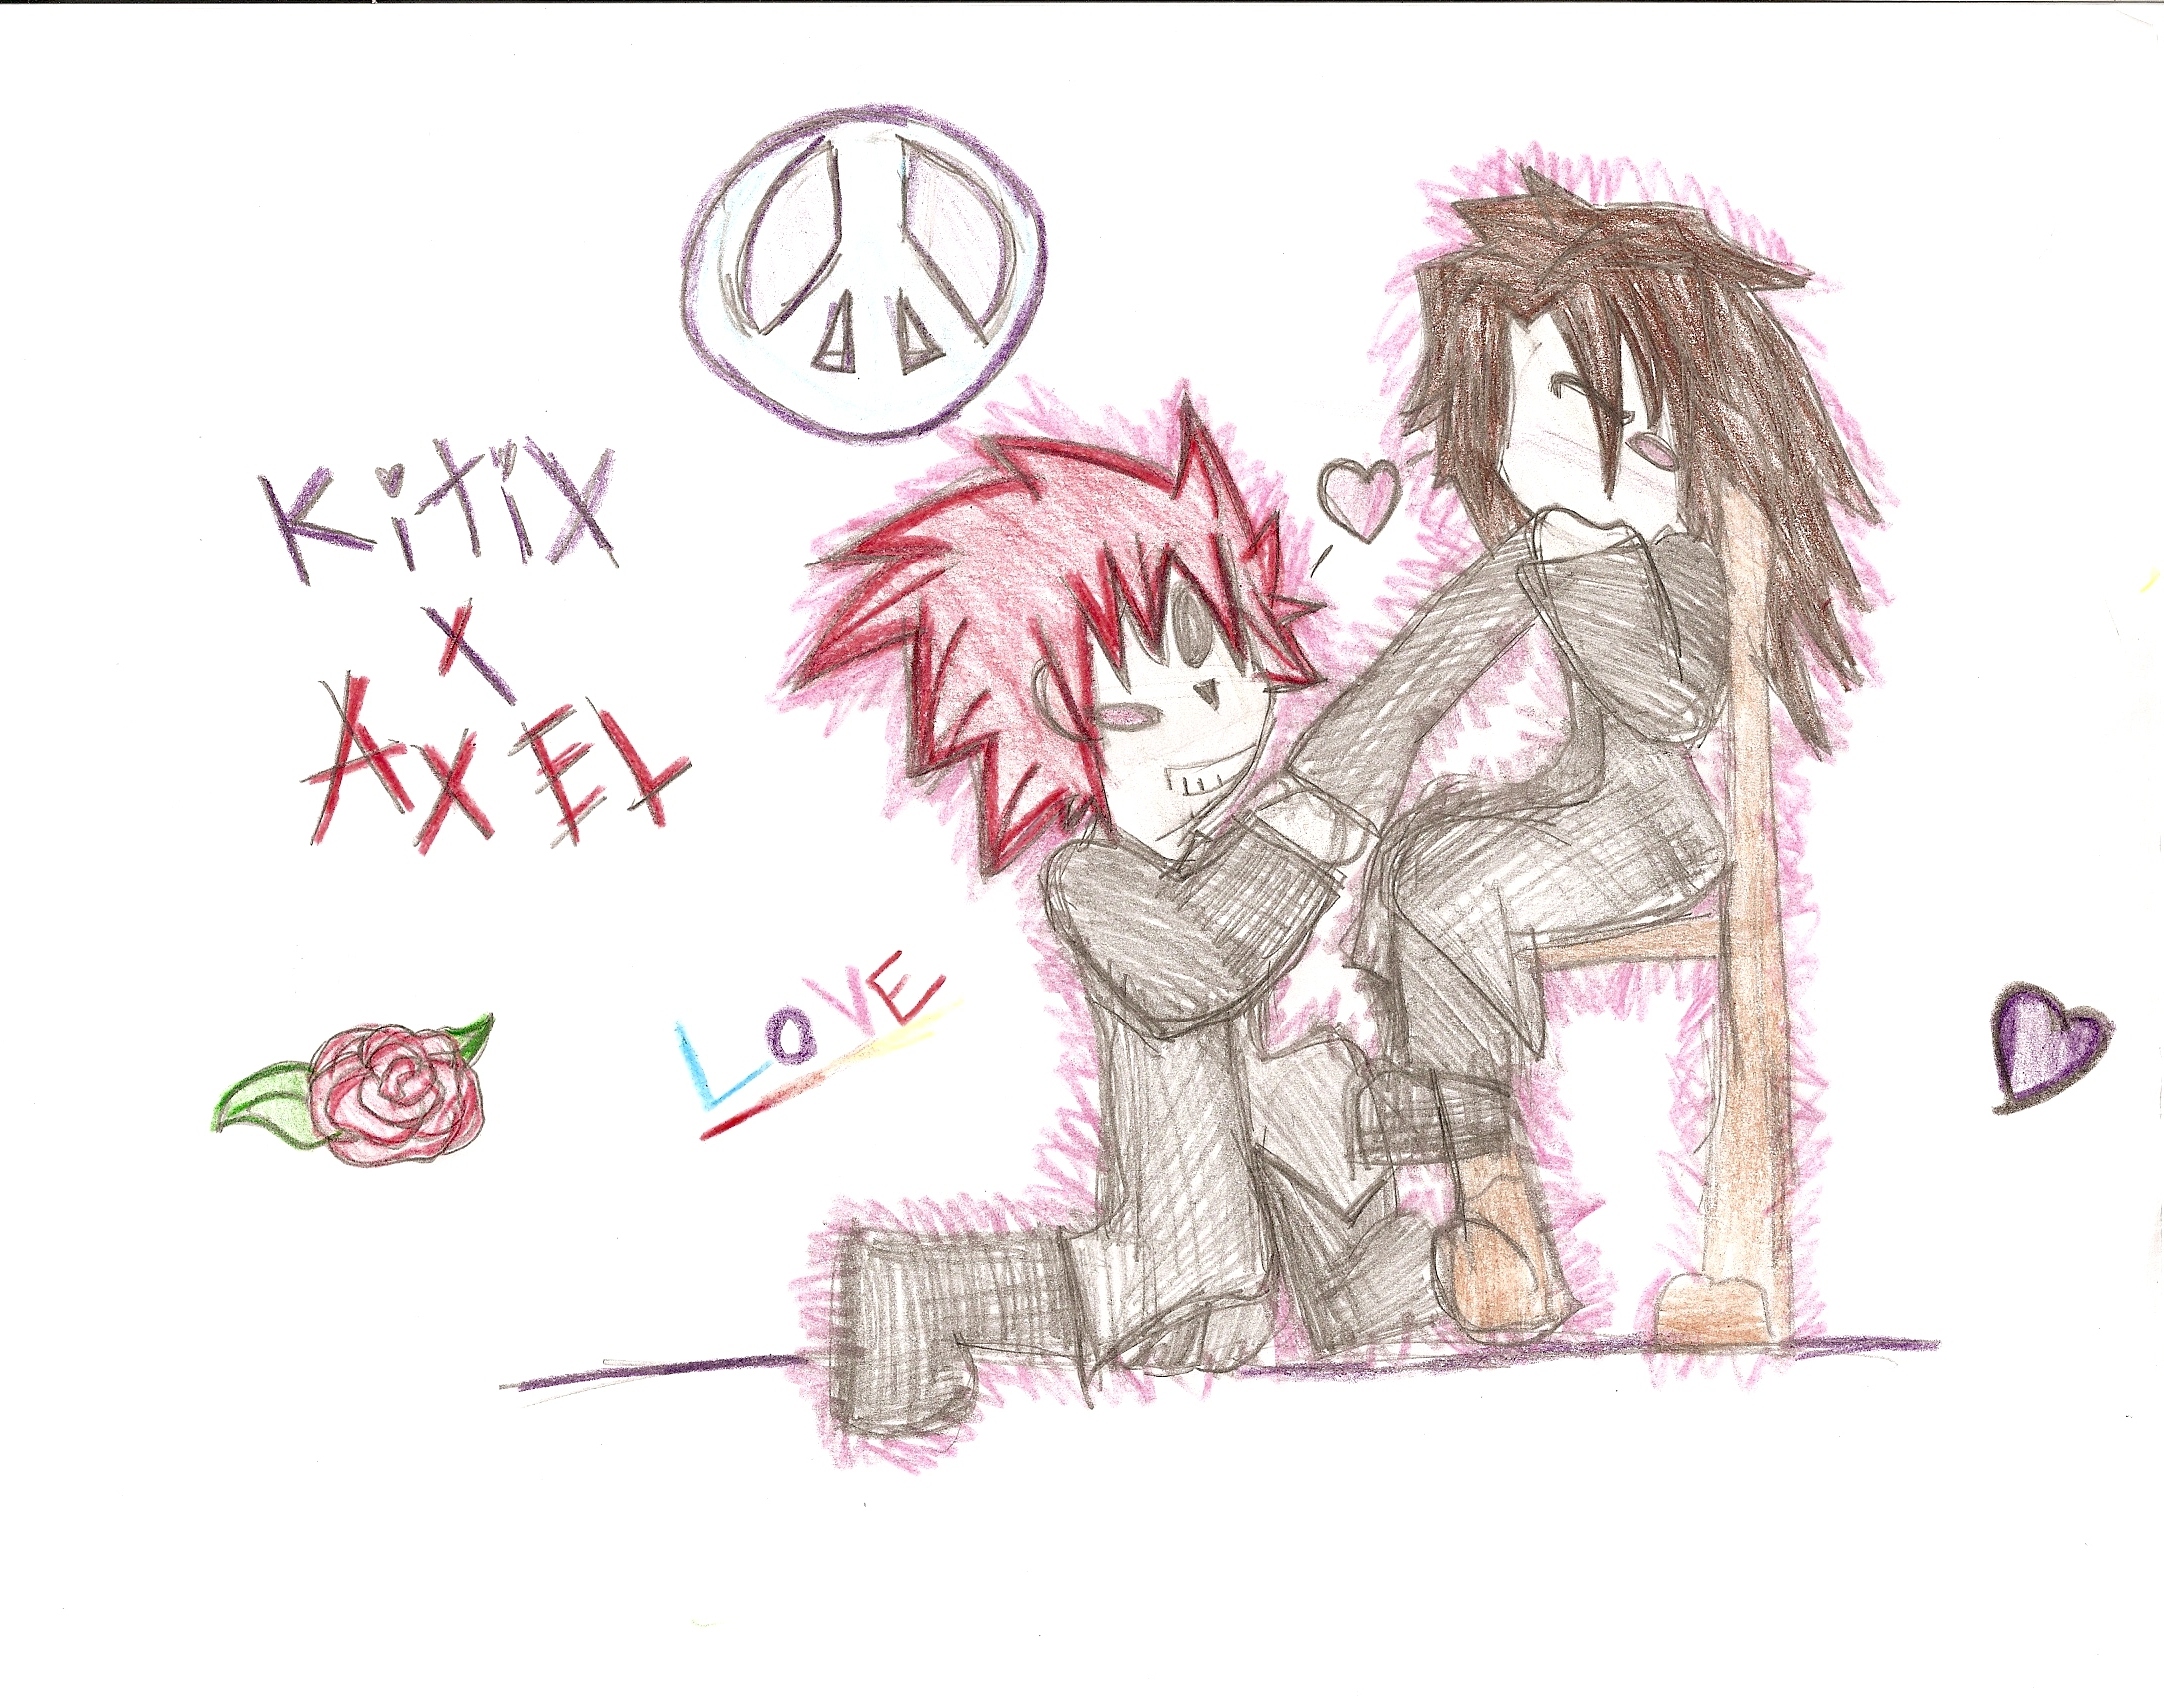 Kitix and Axel *contest entry* by moog1895